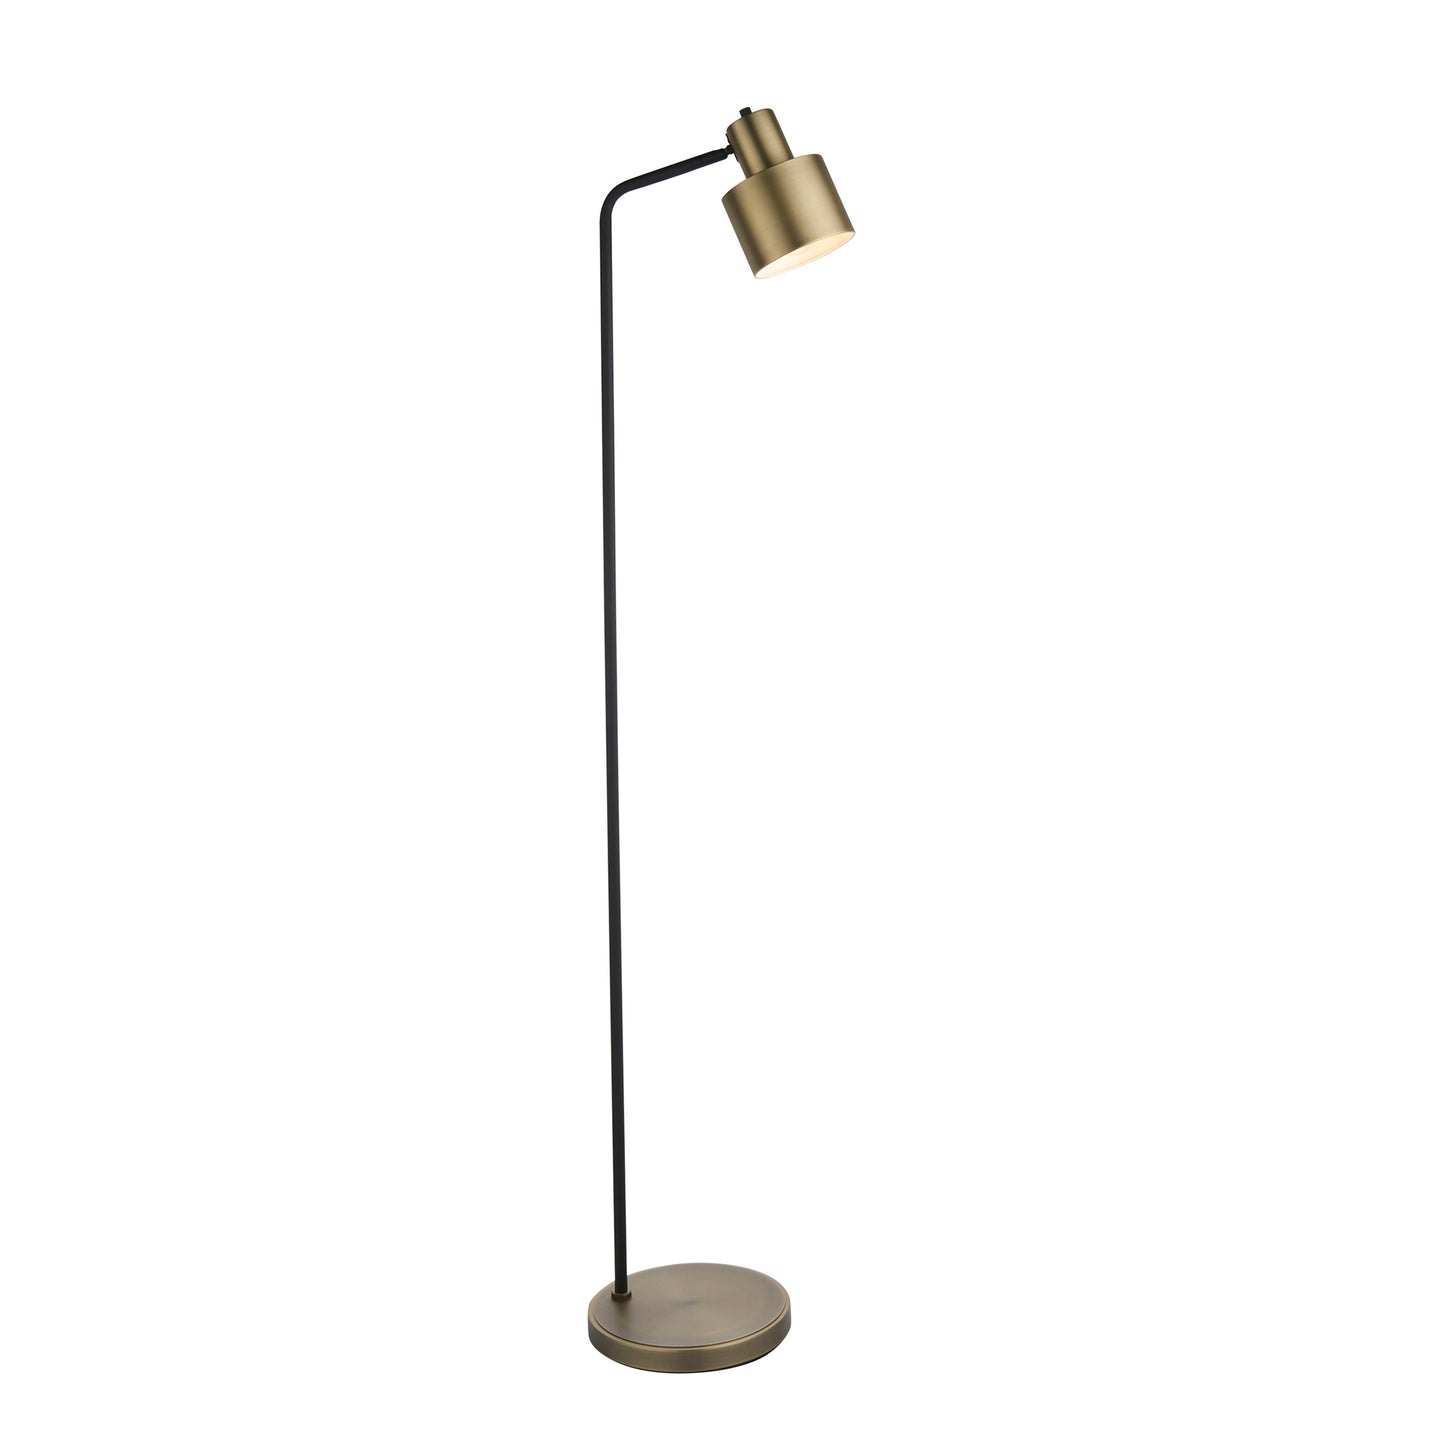 A brass/black Mayfield floor lamp with a Kikiathome.co.uk base and shade, perfect for interior decor or home furniture.